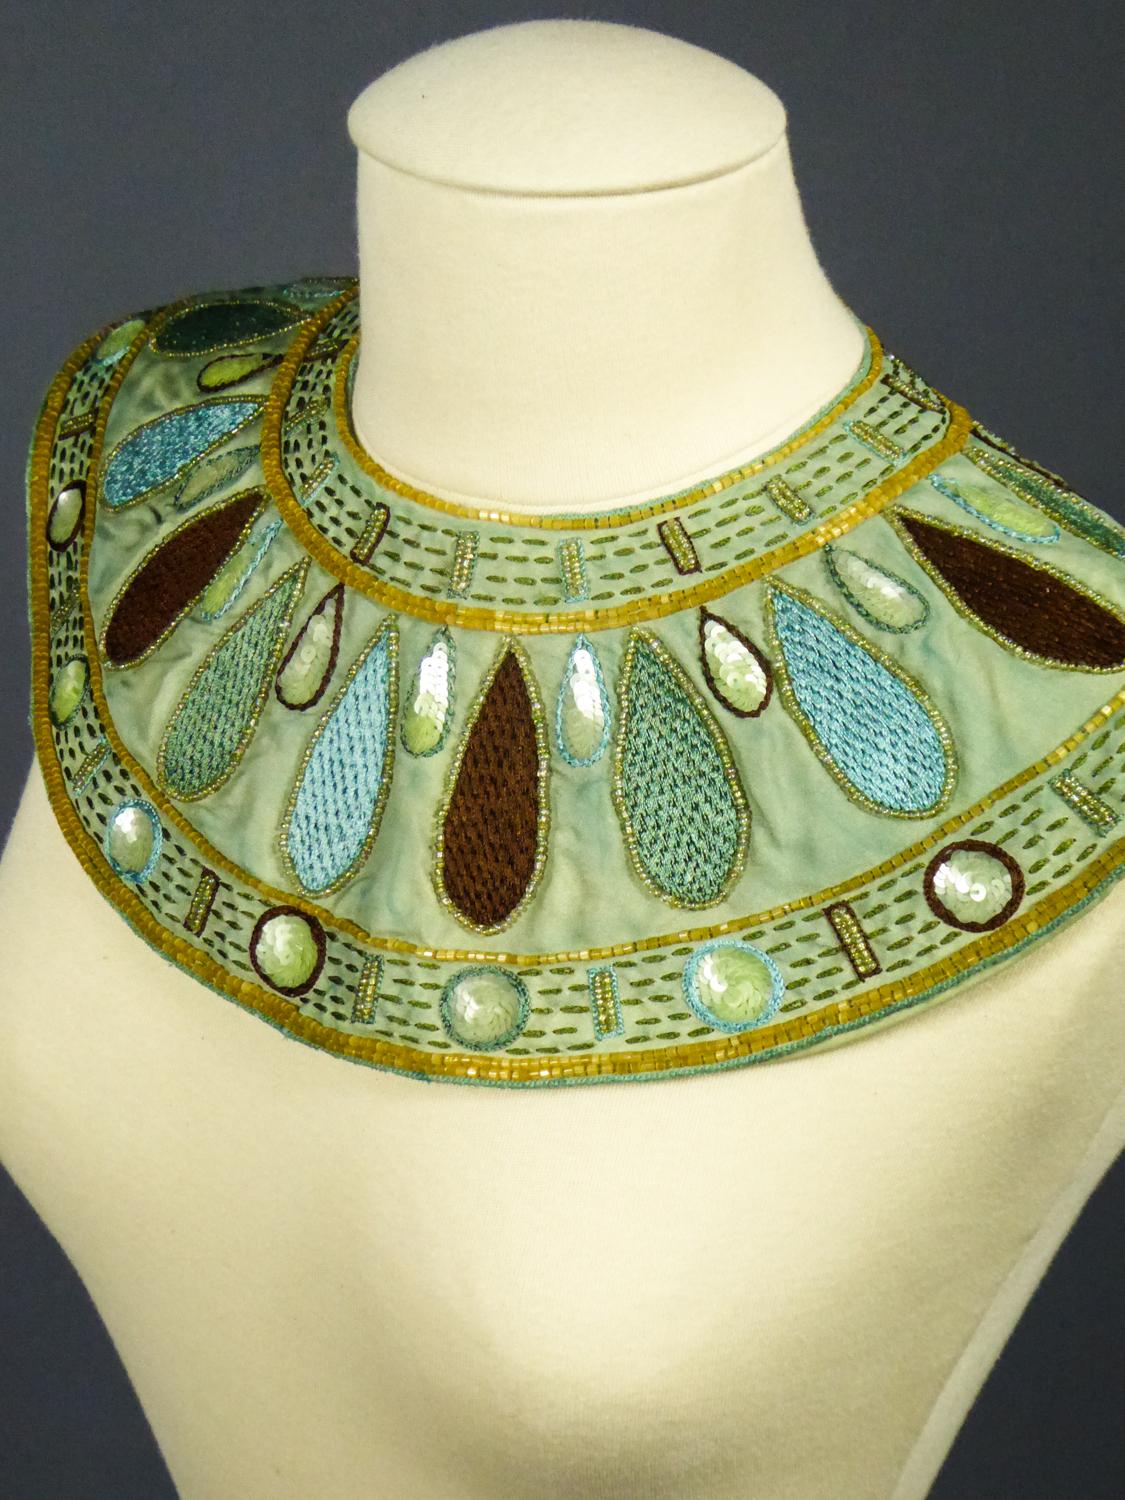 Circa 1940-1960
France

Impressive Egyptian-style collar or jewllery, probably from a film production around the 1950s. Background in sky-blue silk taffeta entirely embroidered with silk threads in chocolate, blue-gray, yellow and turquoise tones.